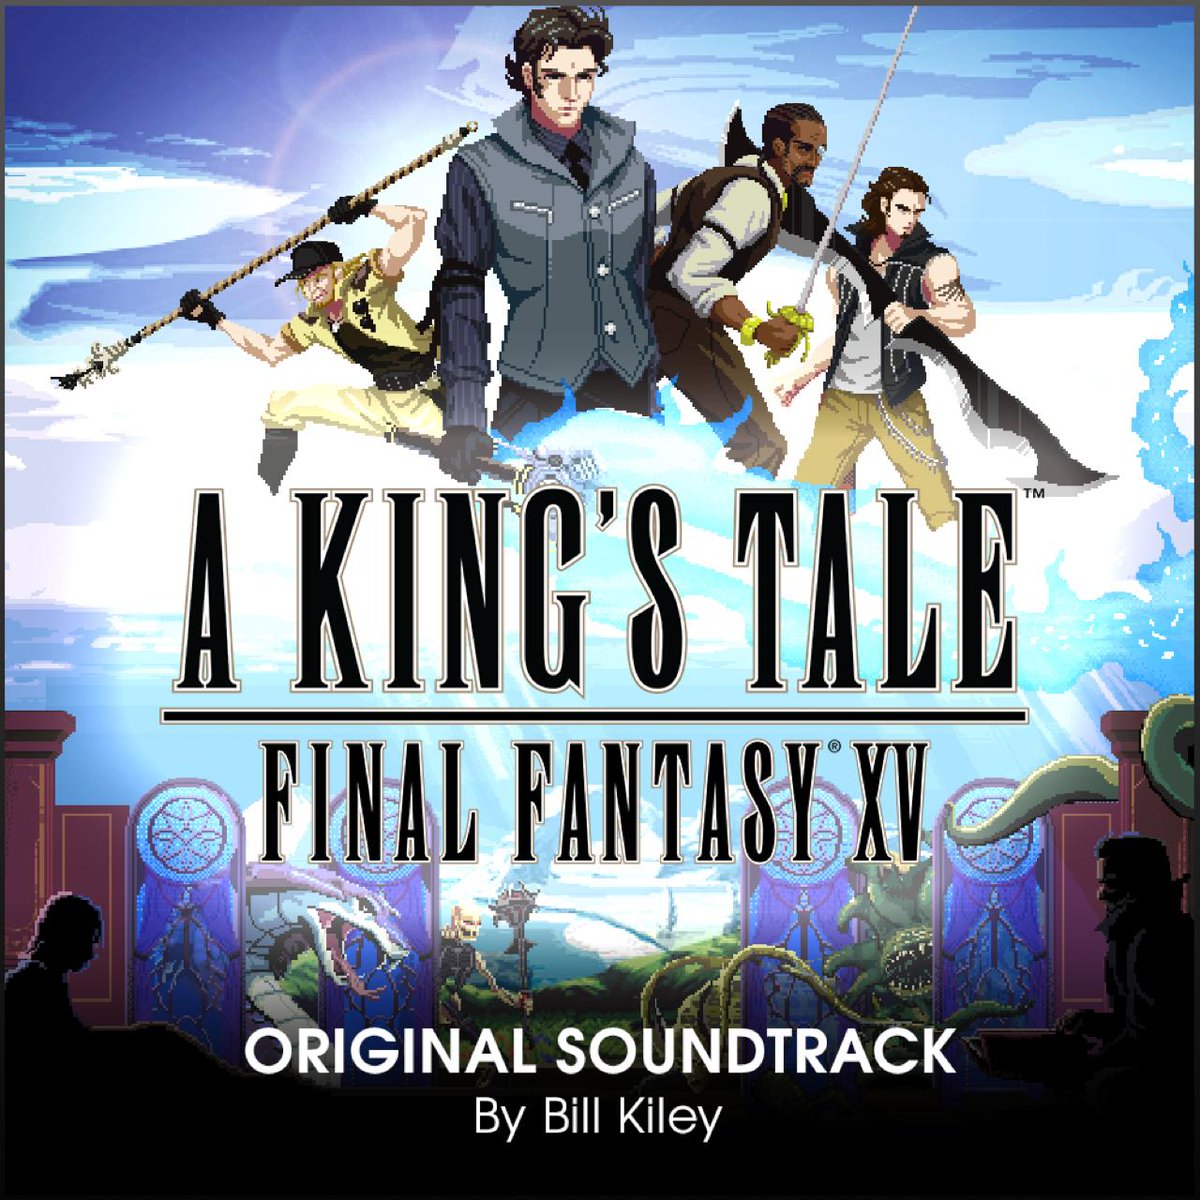 Final Fantasy XV: A King’s Tale soundtrack available for free download